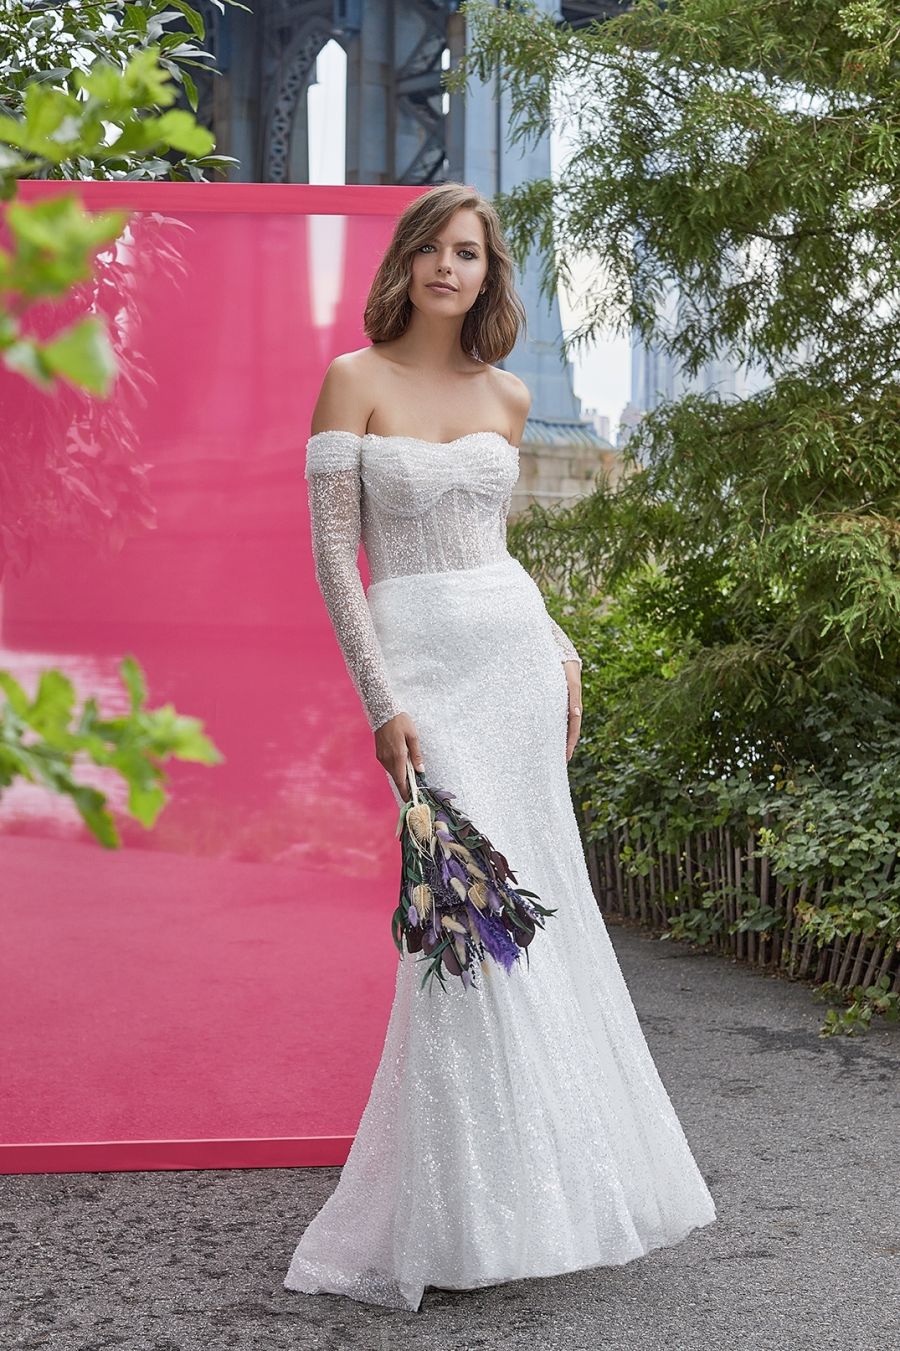 Don't Miss These 29 Off-the-Shoulder Wedding Dresses